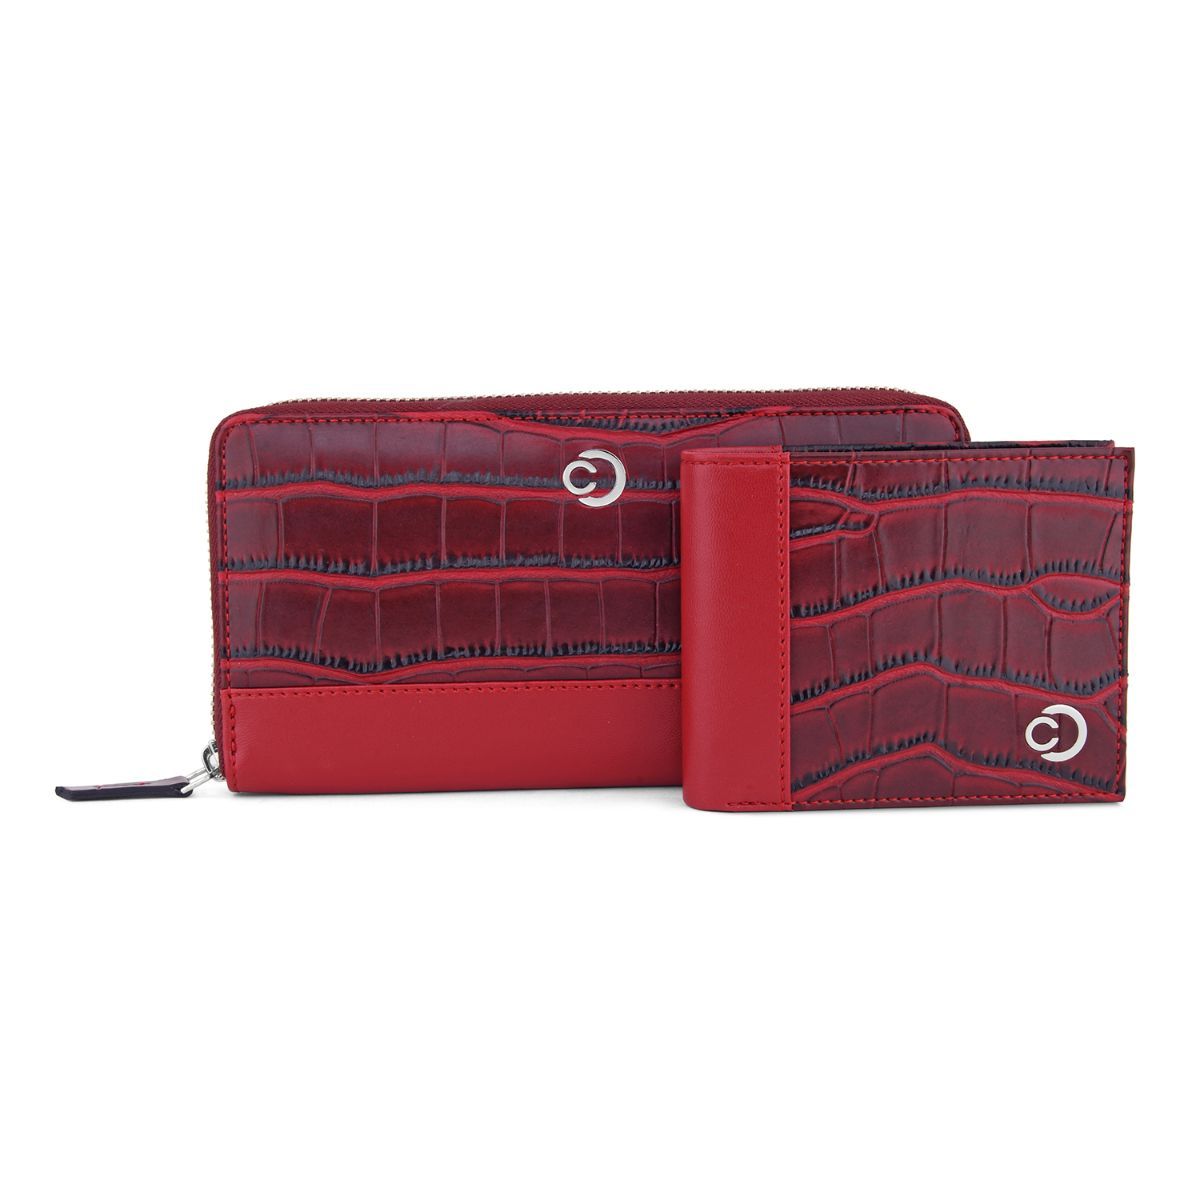 Neo Leather Two Fold Wallet with zip pocket - Black / Red – Mai Soli